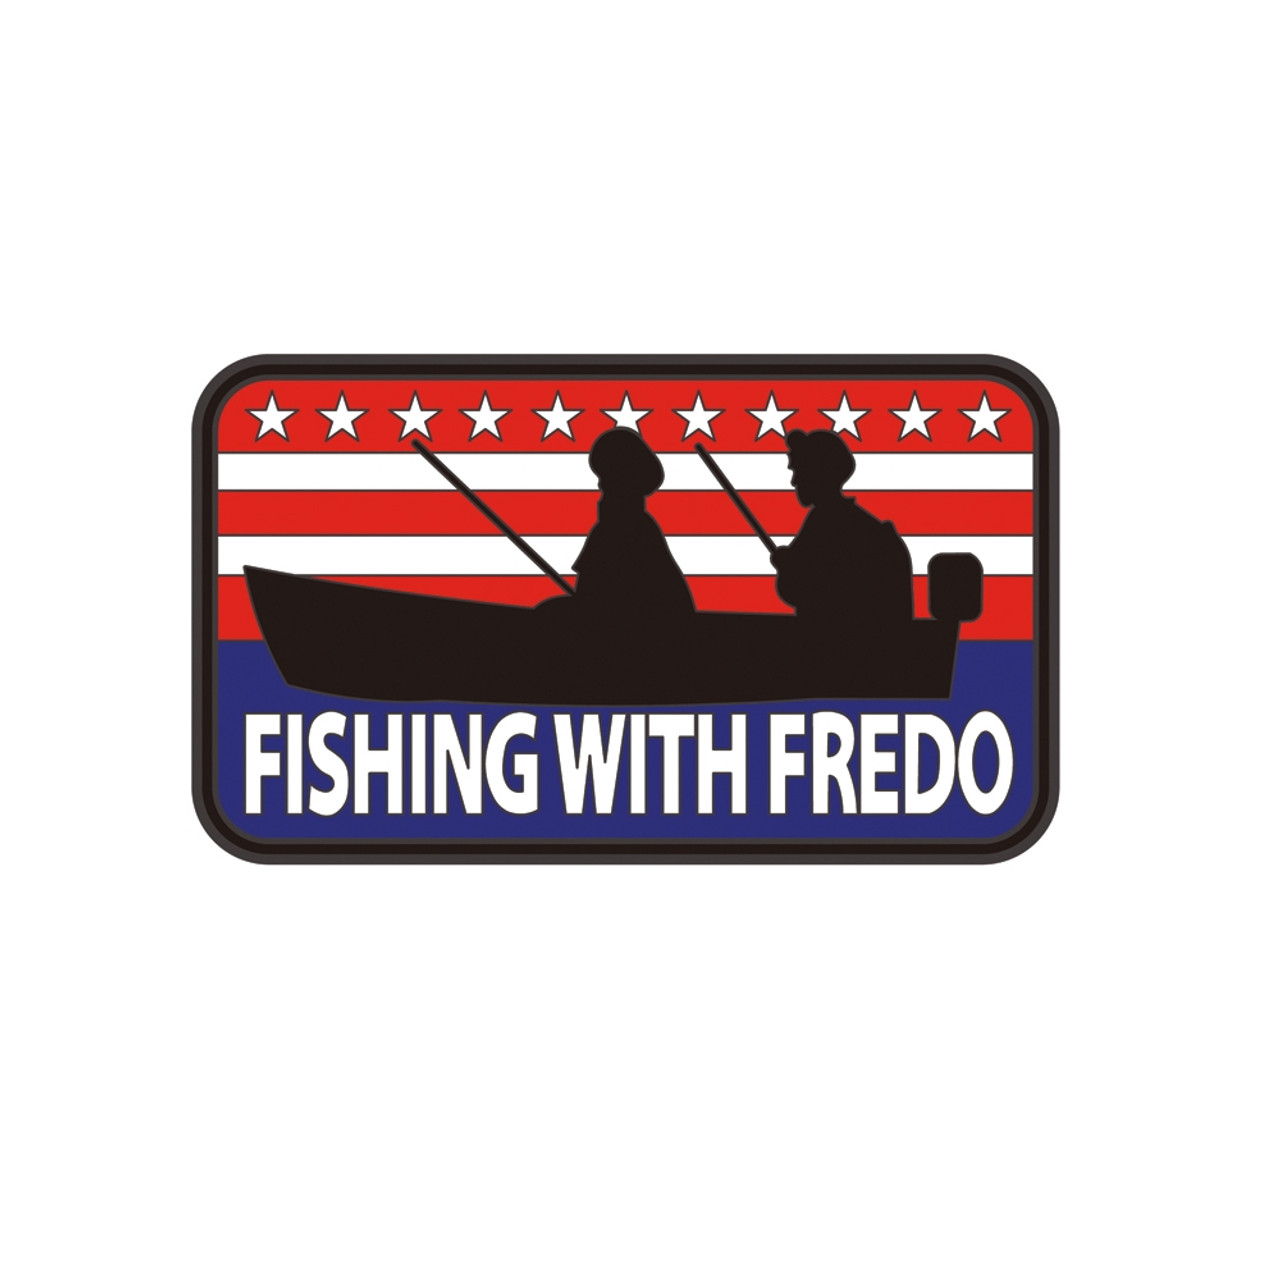 https://cdn11.bigcommerce.com/s-kwffvaivx/images/stencil/1280x1280/products/656/2838/fishingwithfredopatch_1__44273.1707786579.jpg?c=1